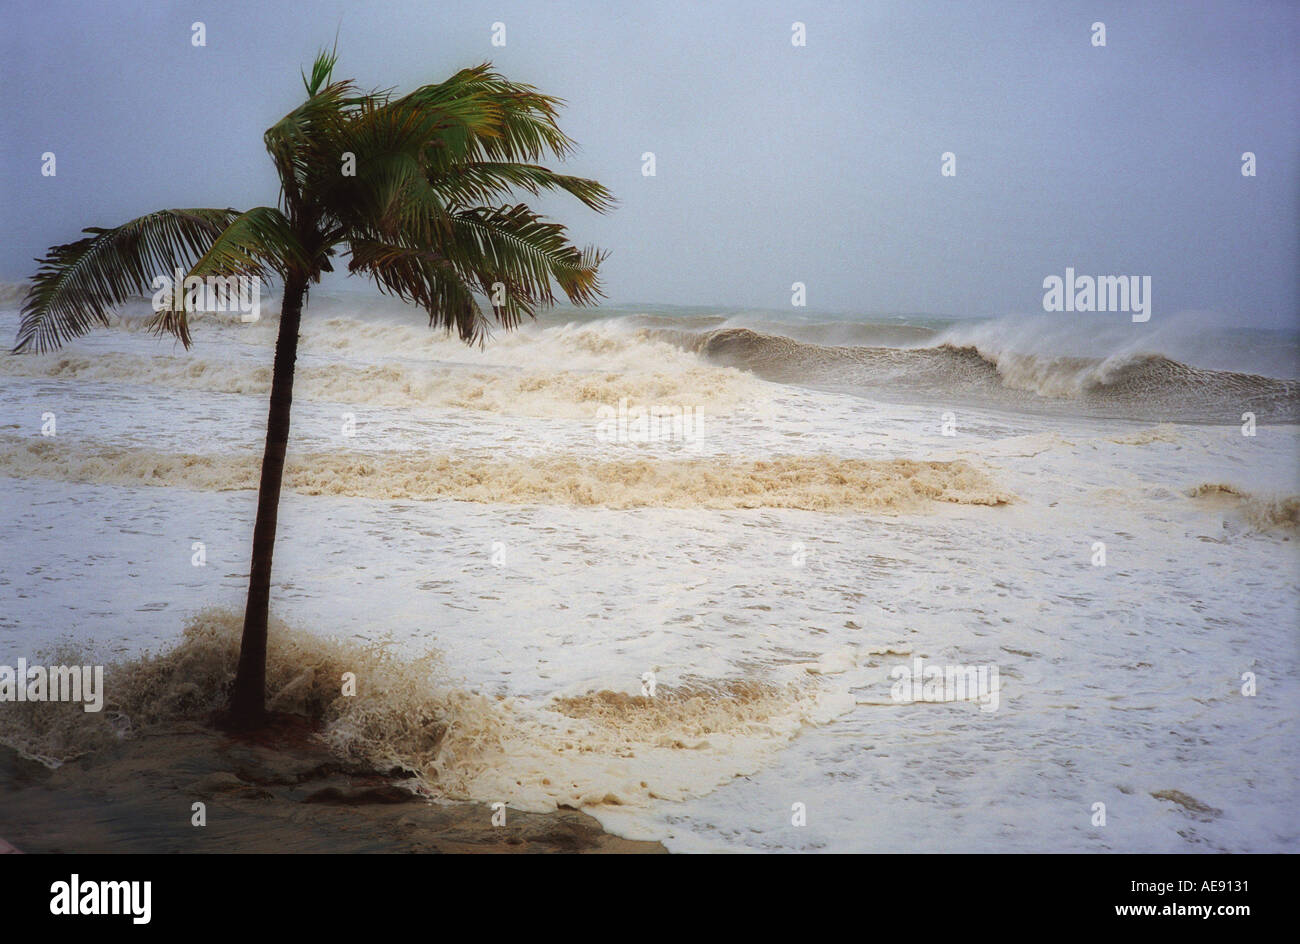 Coconut palm tree blowing in the wind and turbulent ocean during hurricane in Baja California Mexico Stock Photo